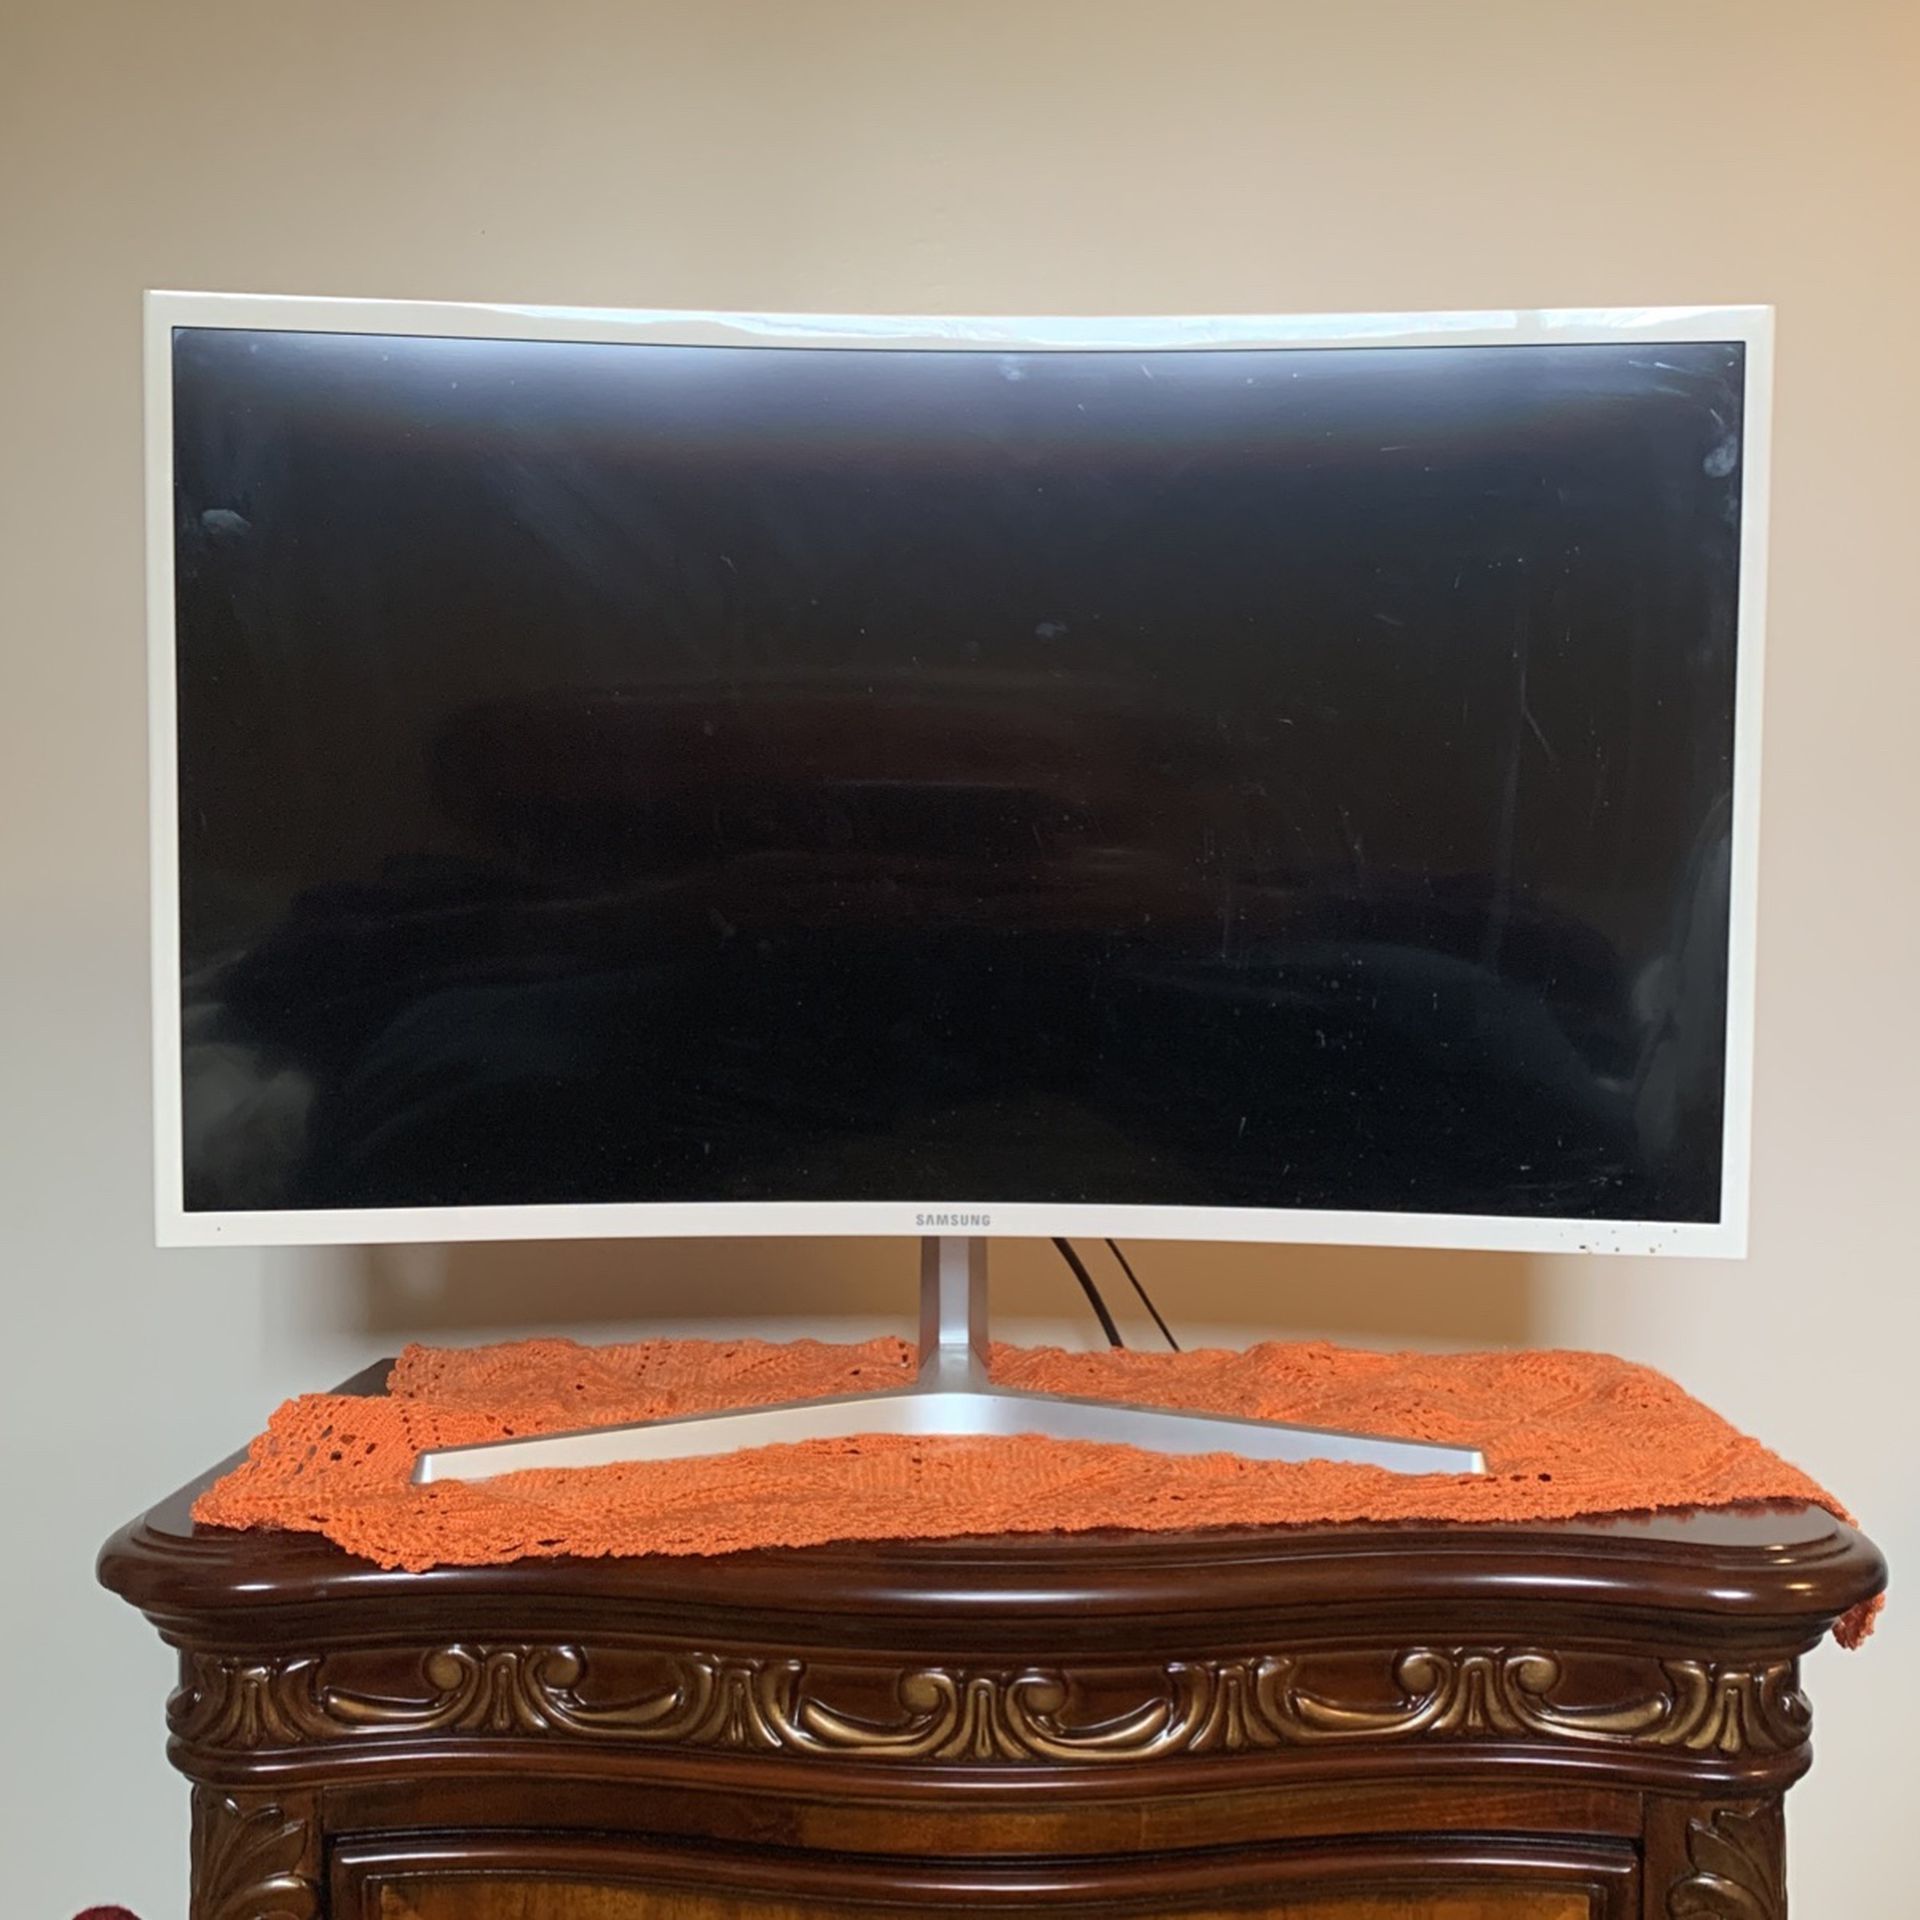 Samsung 32” Curved Screen Monitor